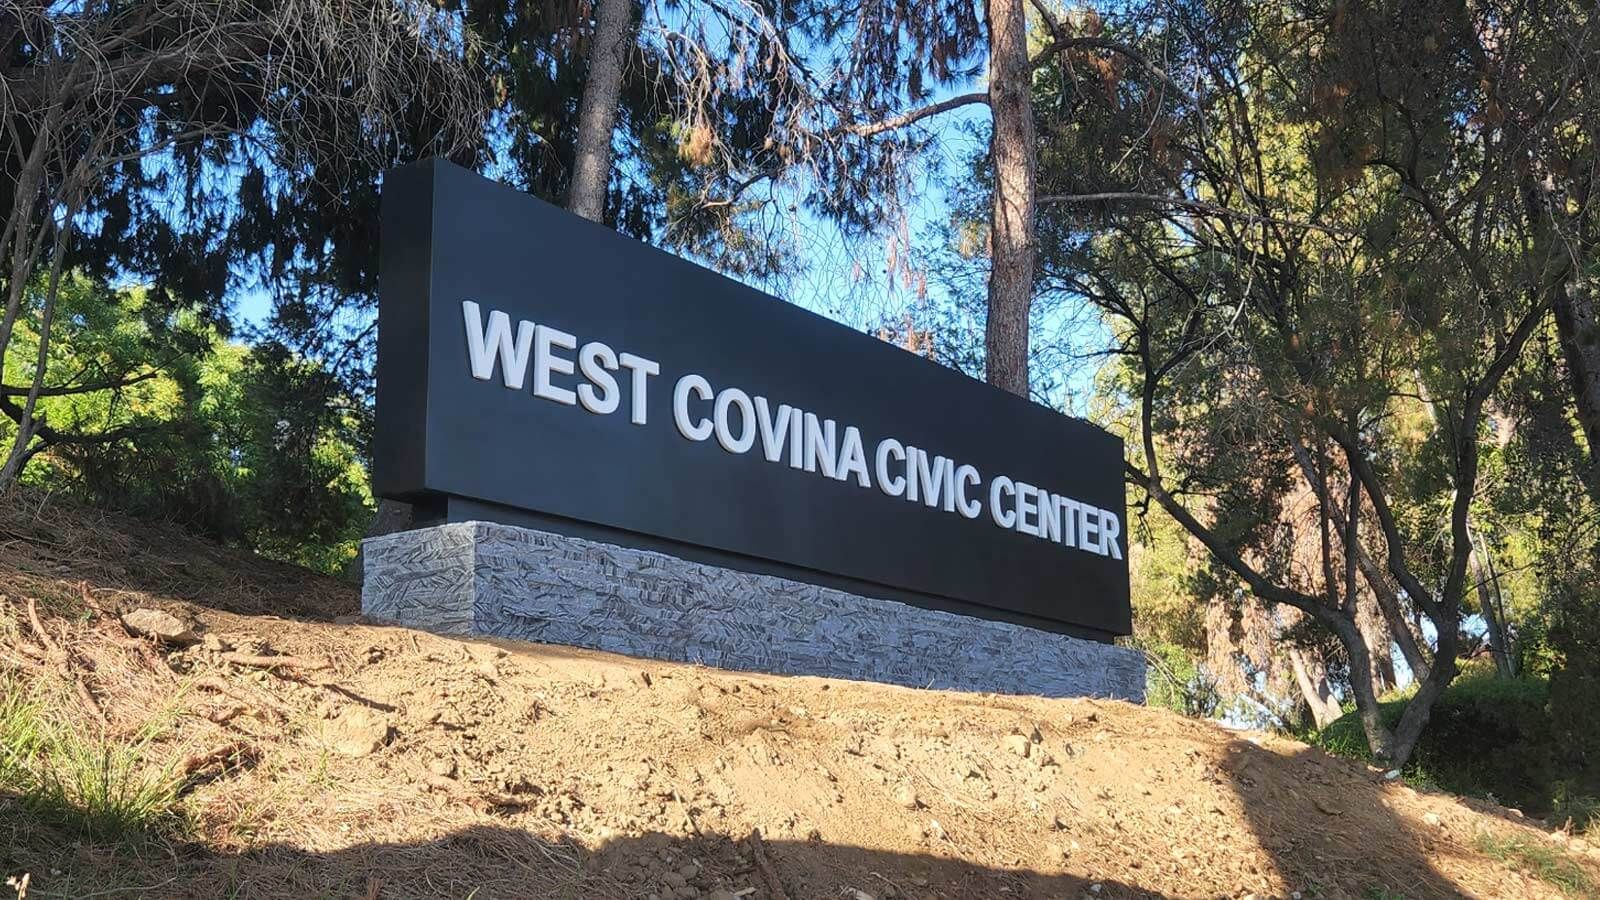 West Covina Civic Center custom sign mounted outdoors